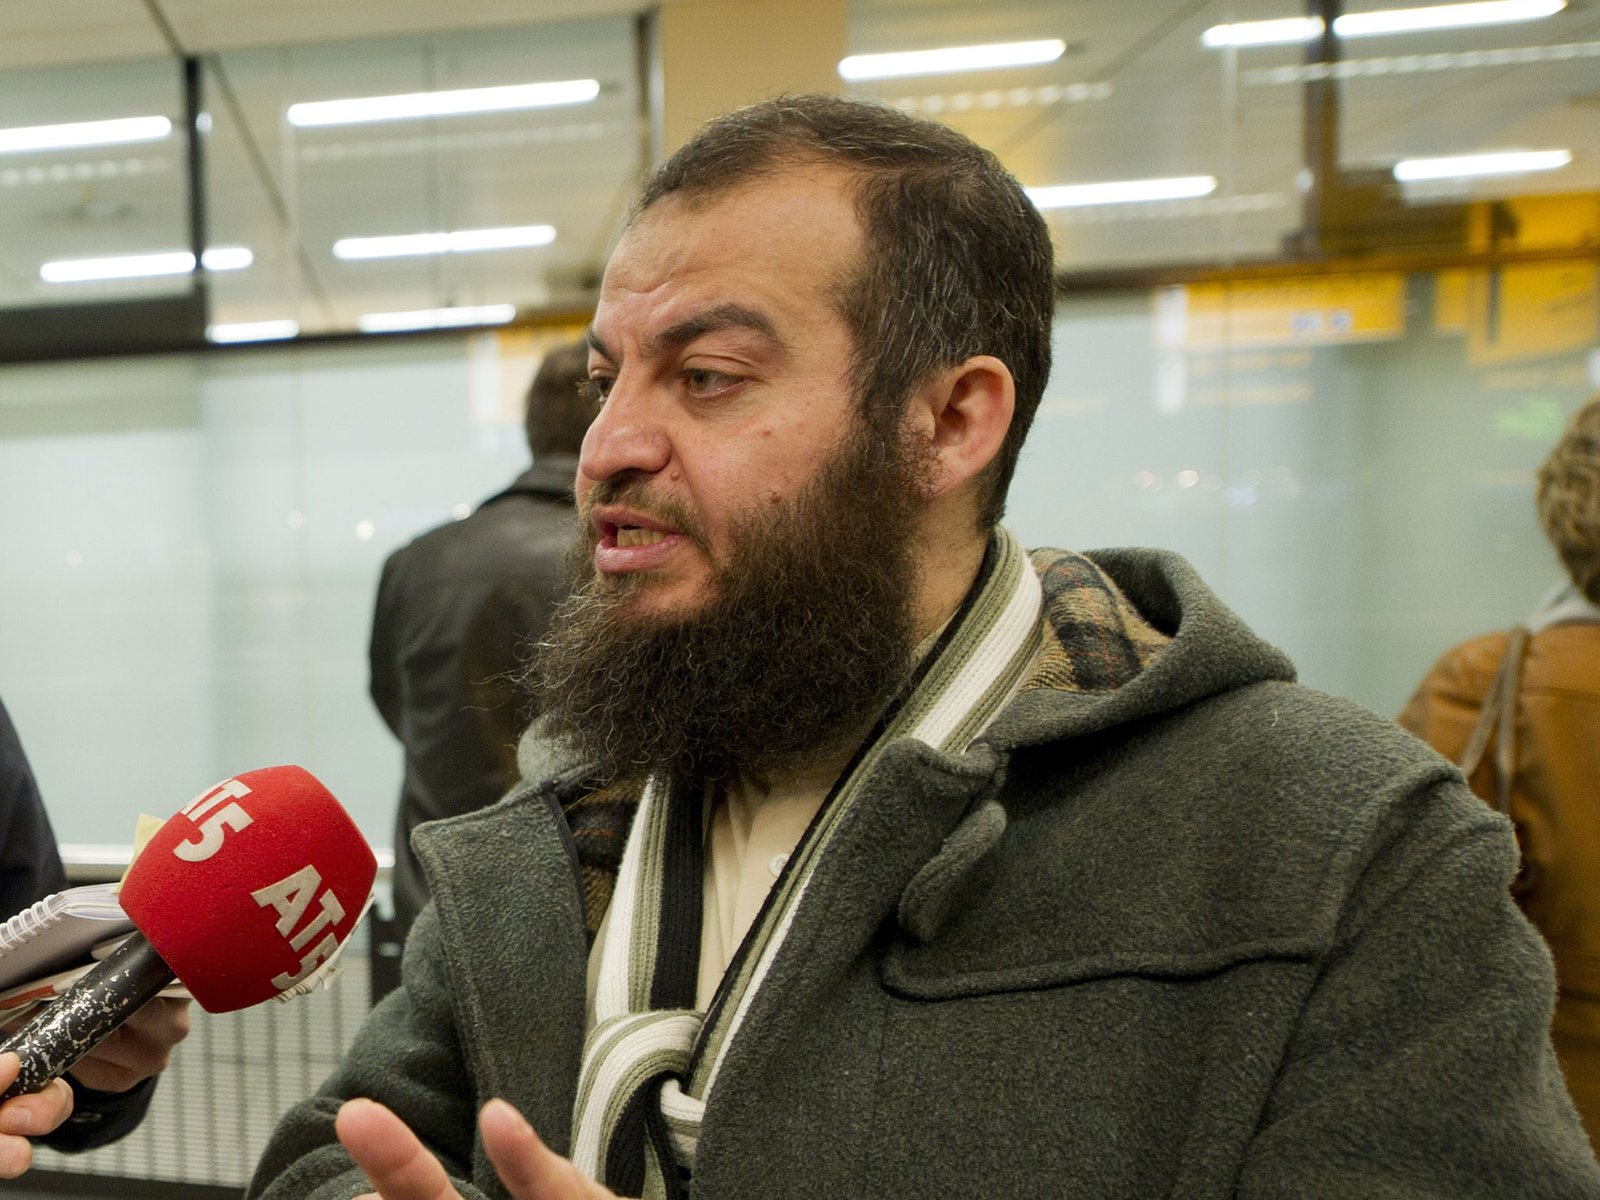 In Plain Sight: MEND, CAGE, and So-Called “Non-Violent Extremism”